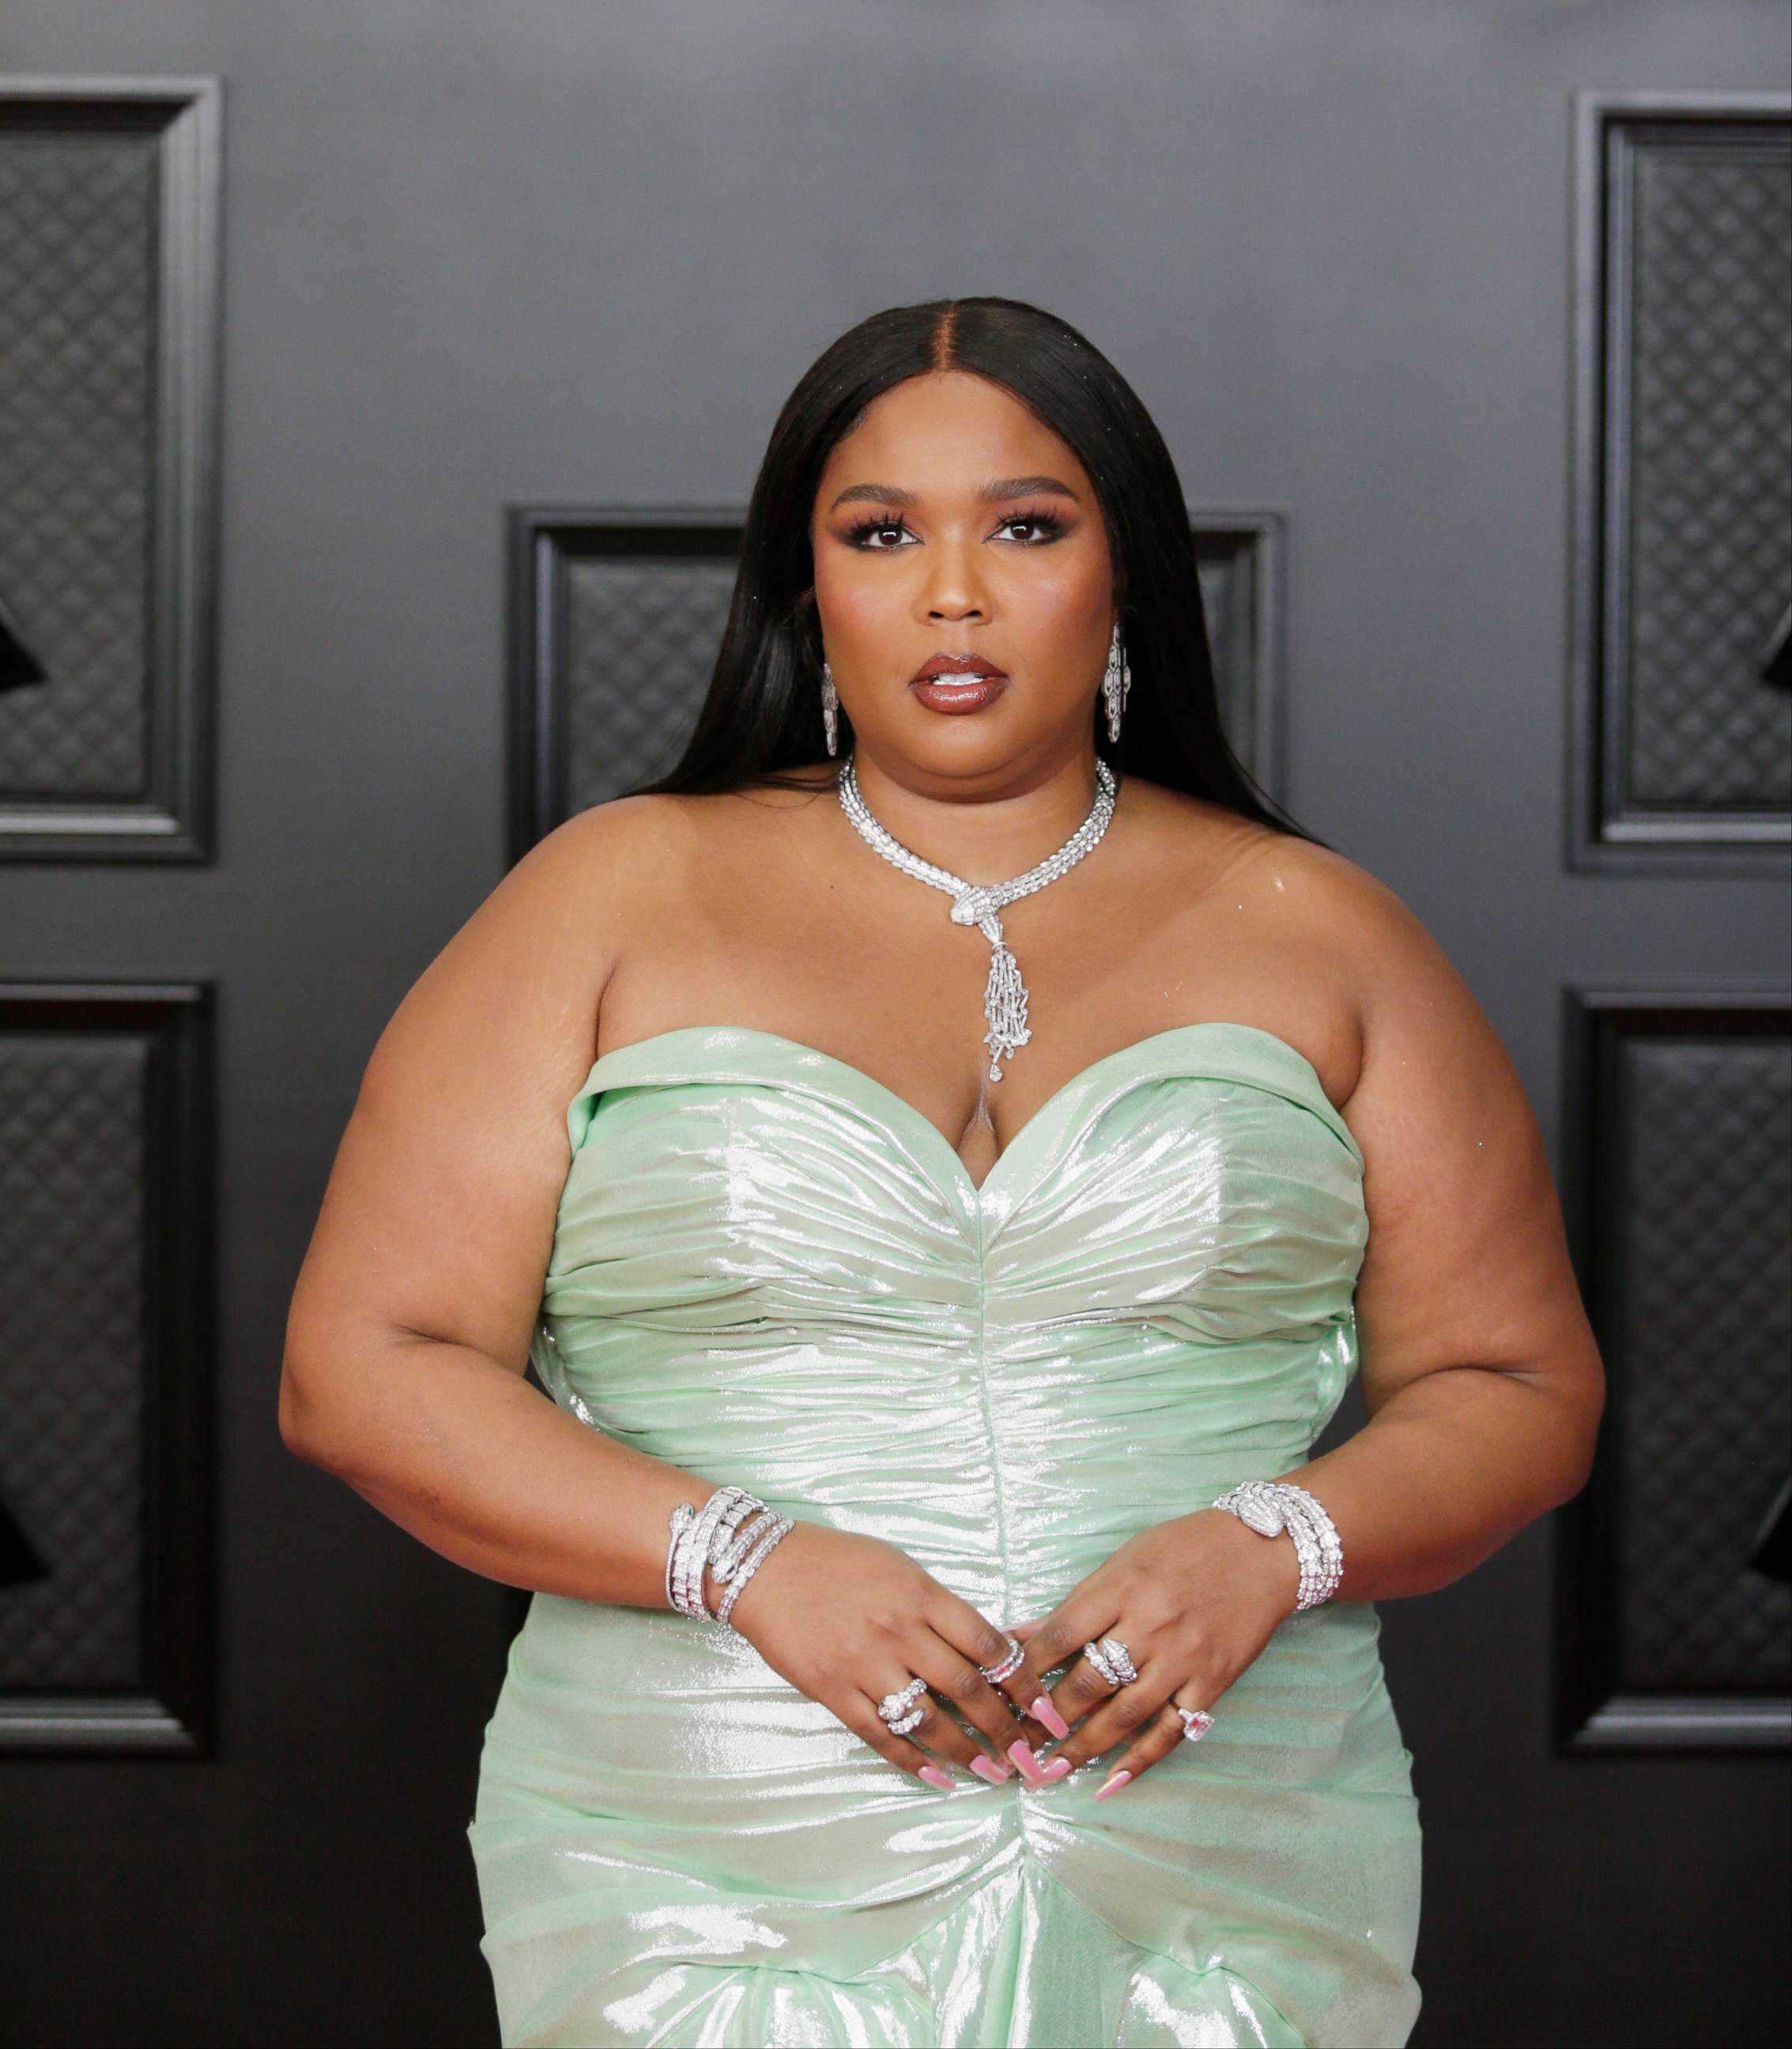 PHOTO: Lizzo at THE 63rd ANNUAL GRAMMY AWARDS in Los Angeles, March 14, 2021.